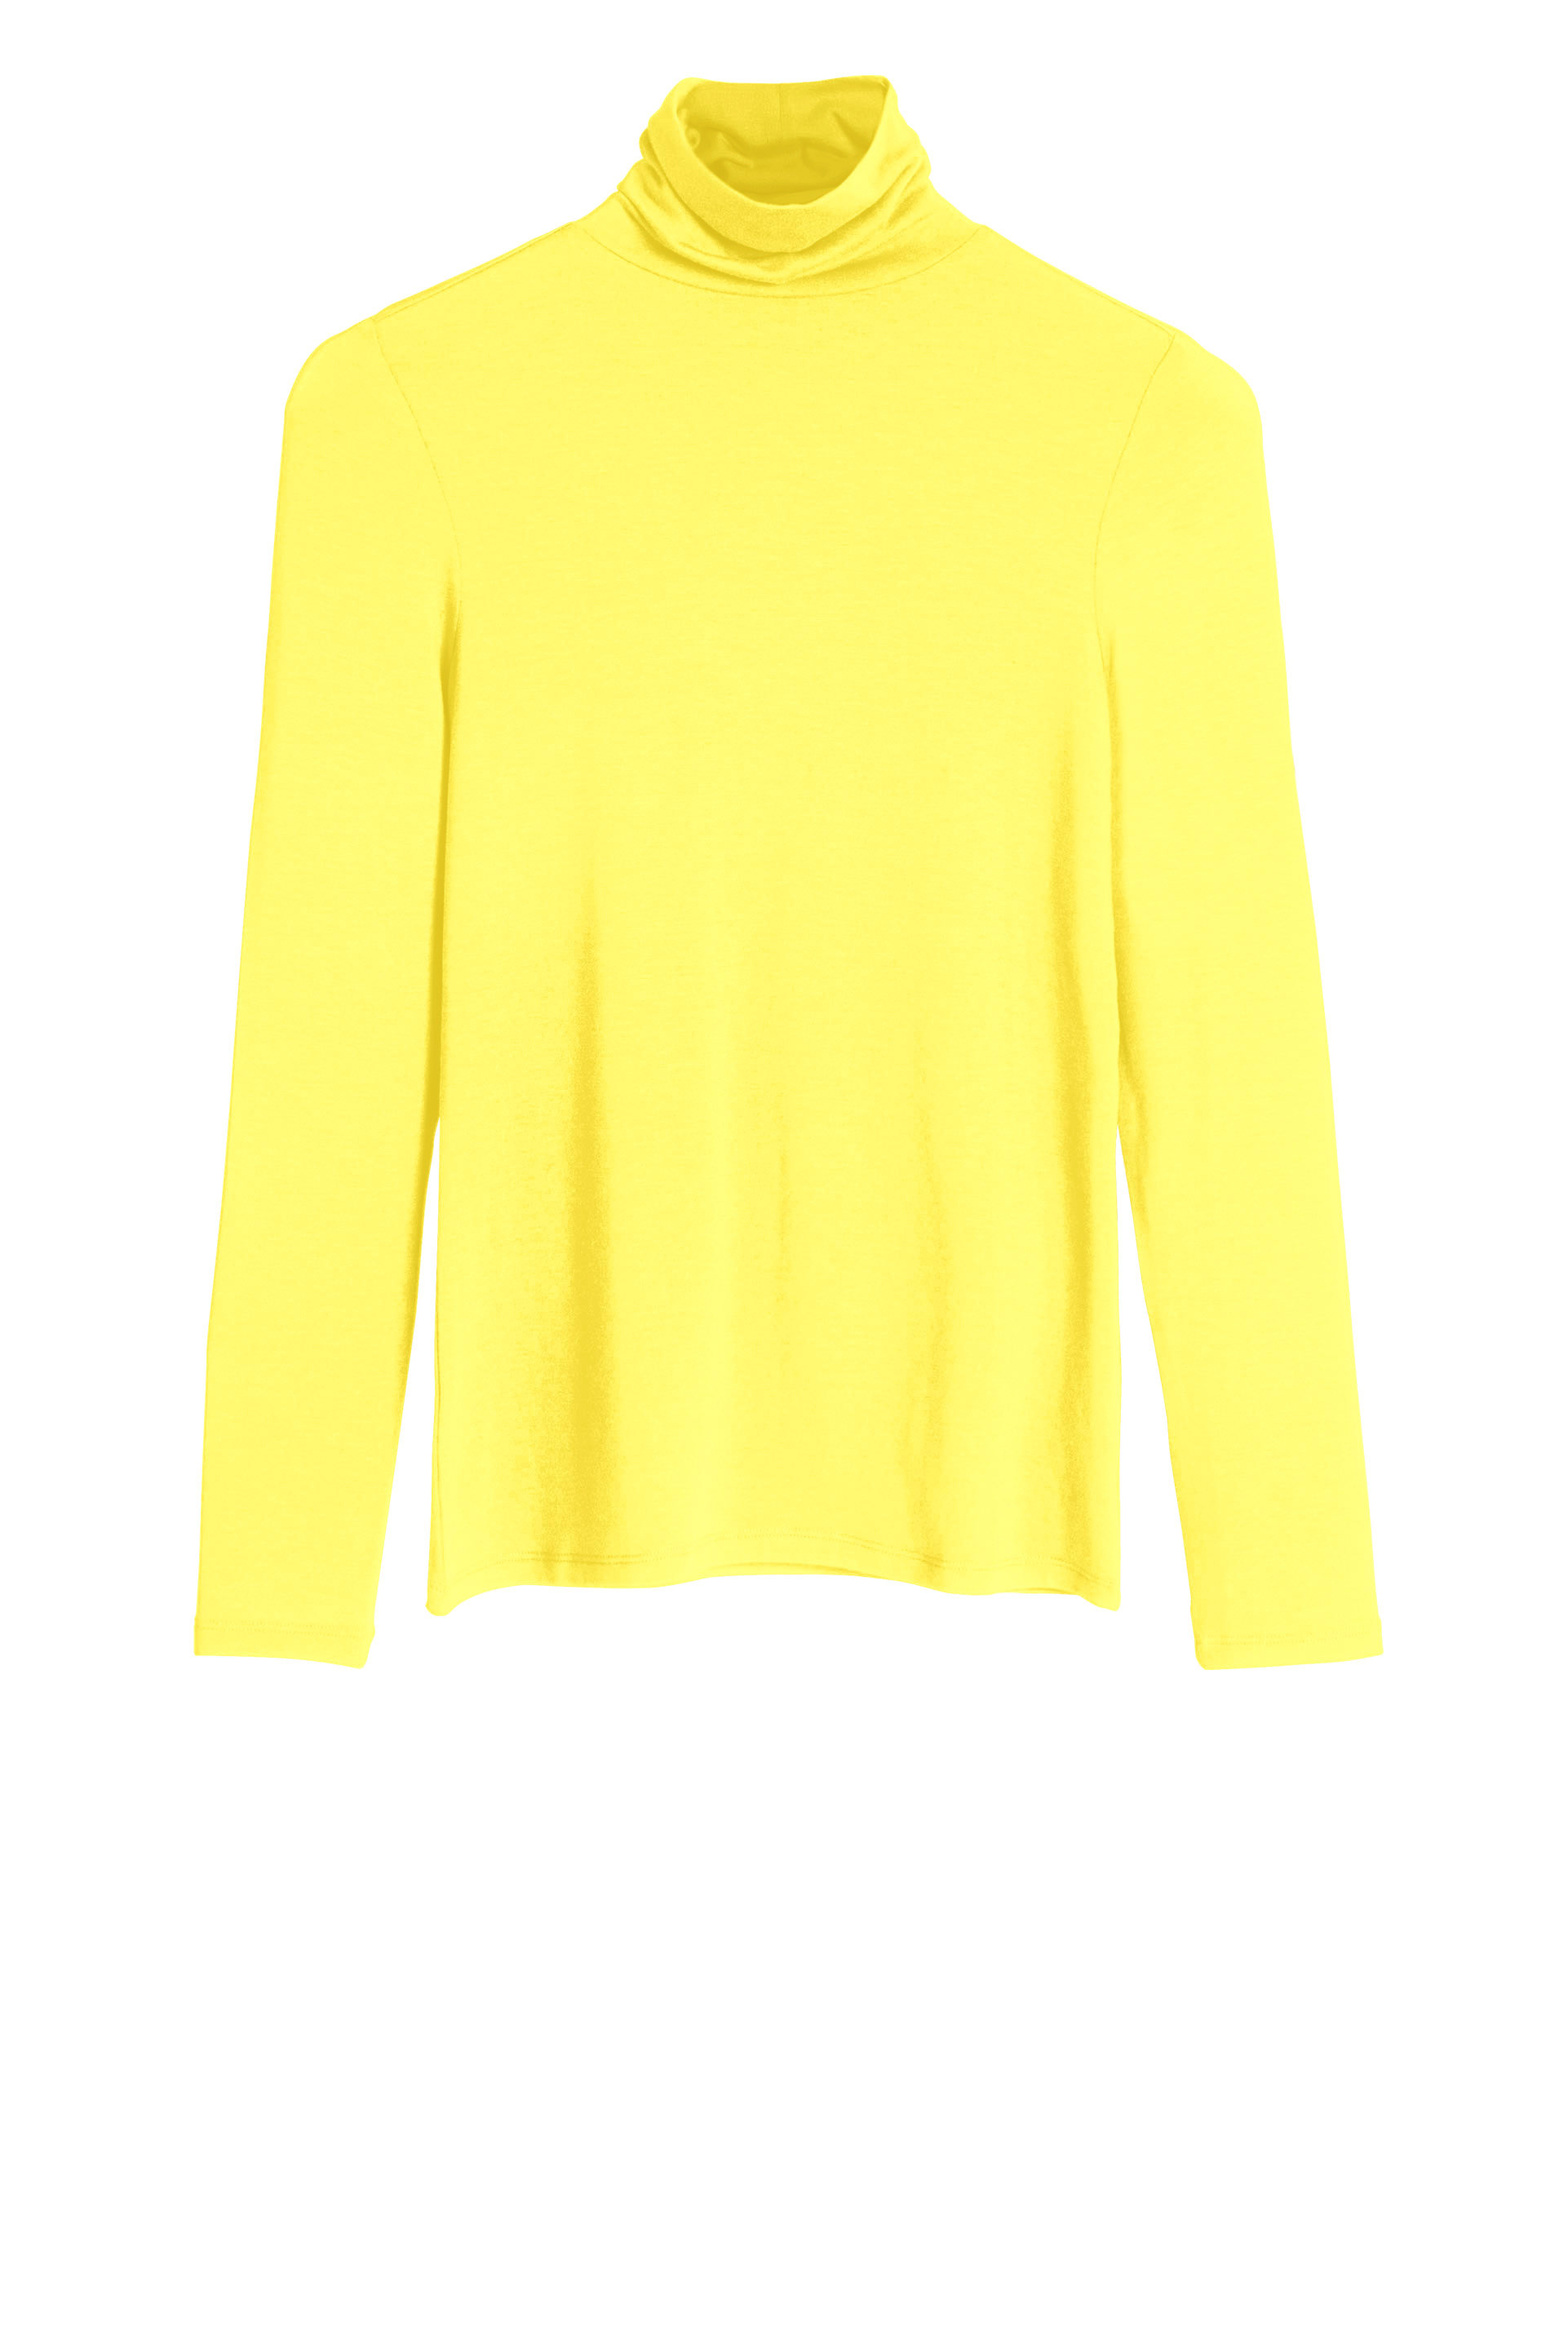 20013_silky_roll_neck_canary_yellow_new.jpg